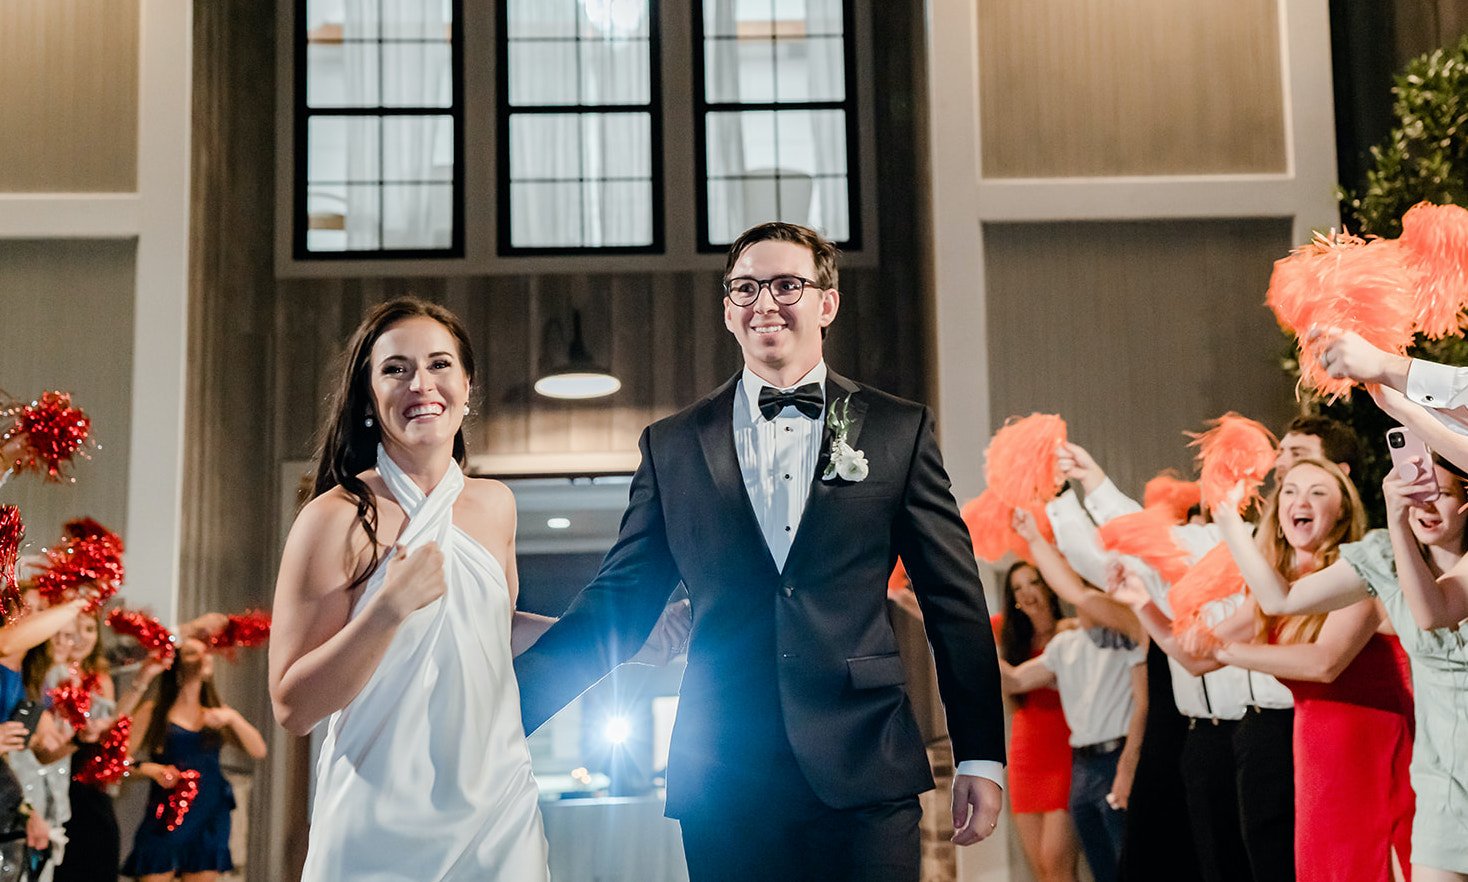 A bride changed into a reception dress and is running with her groom through a path of their friends and family after their wedding in Montgomery, TX.